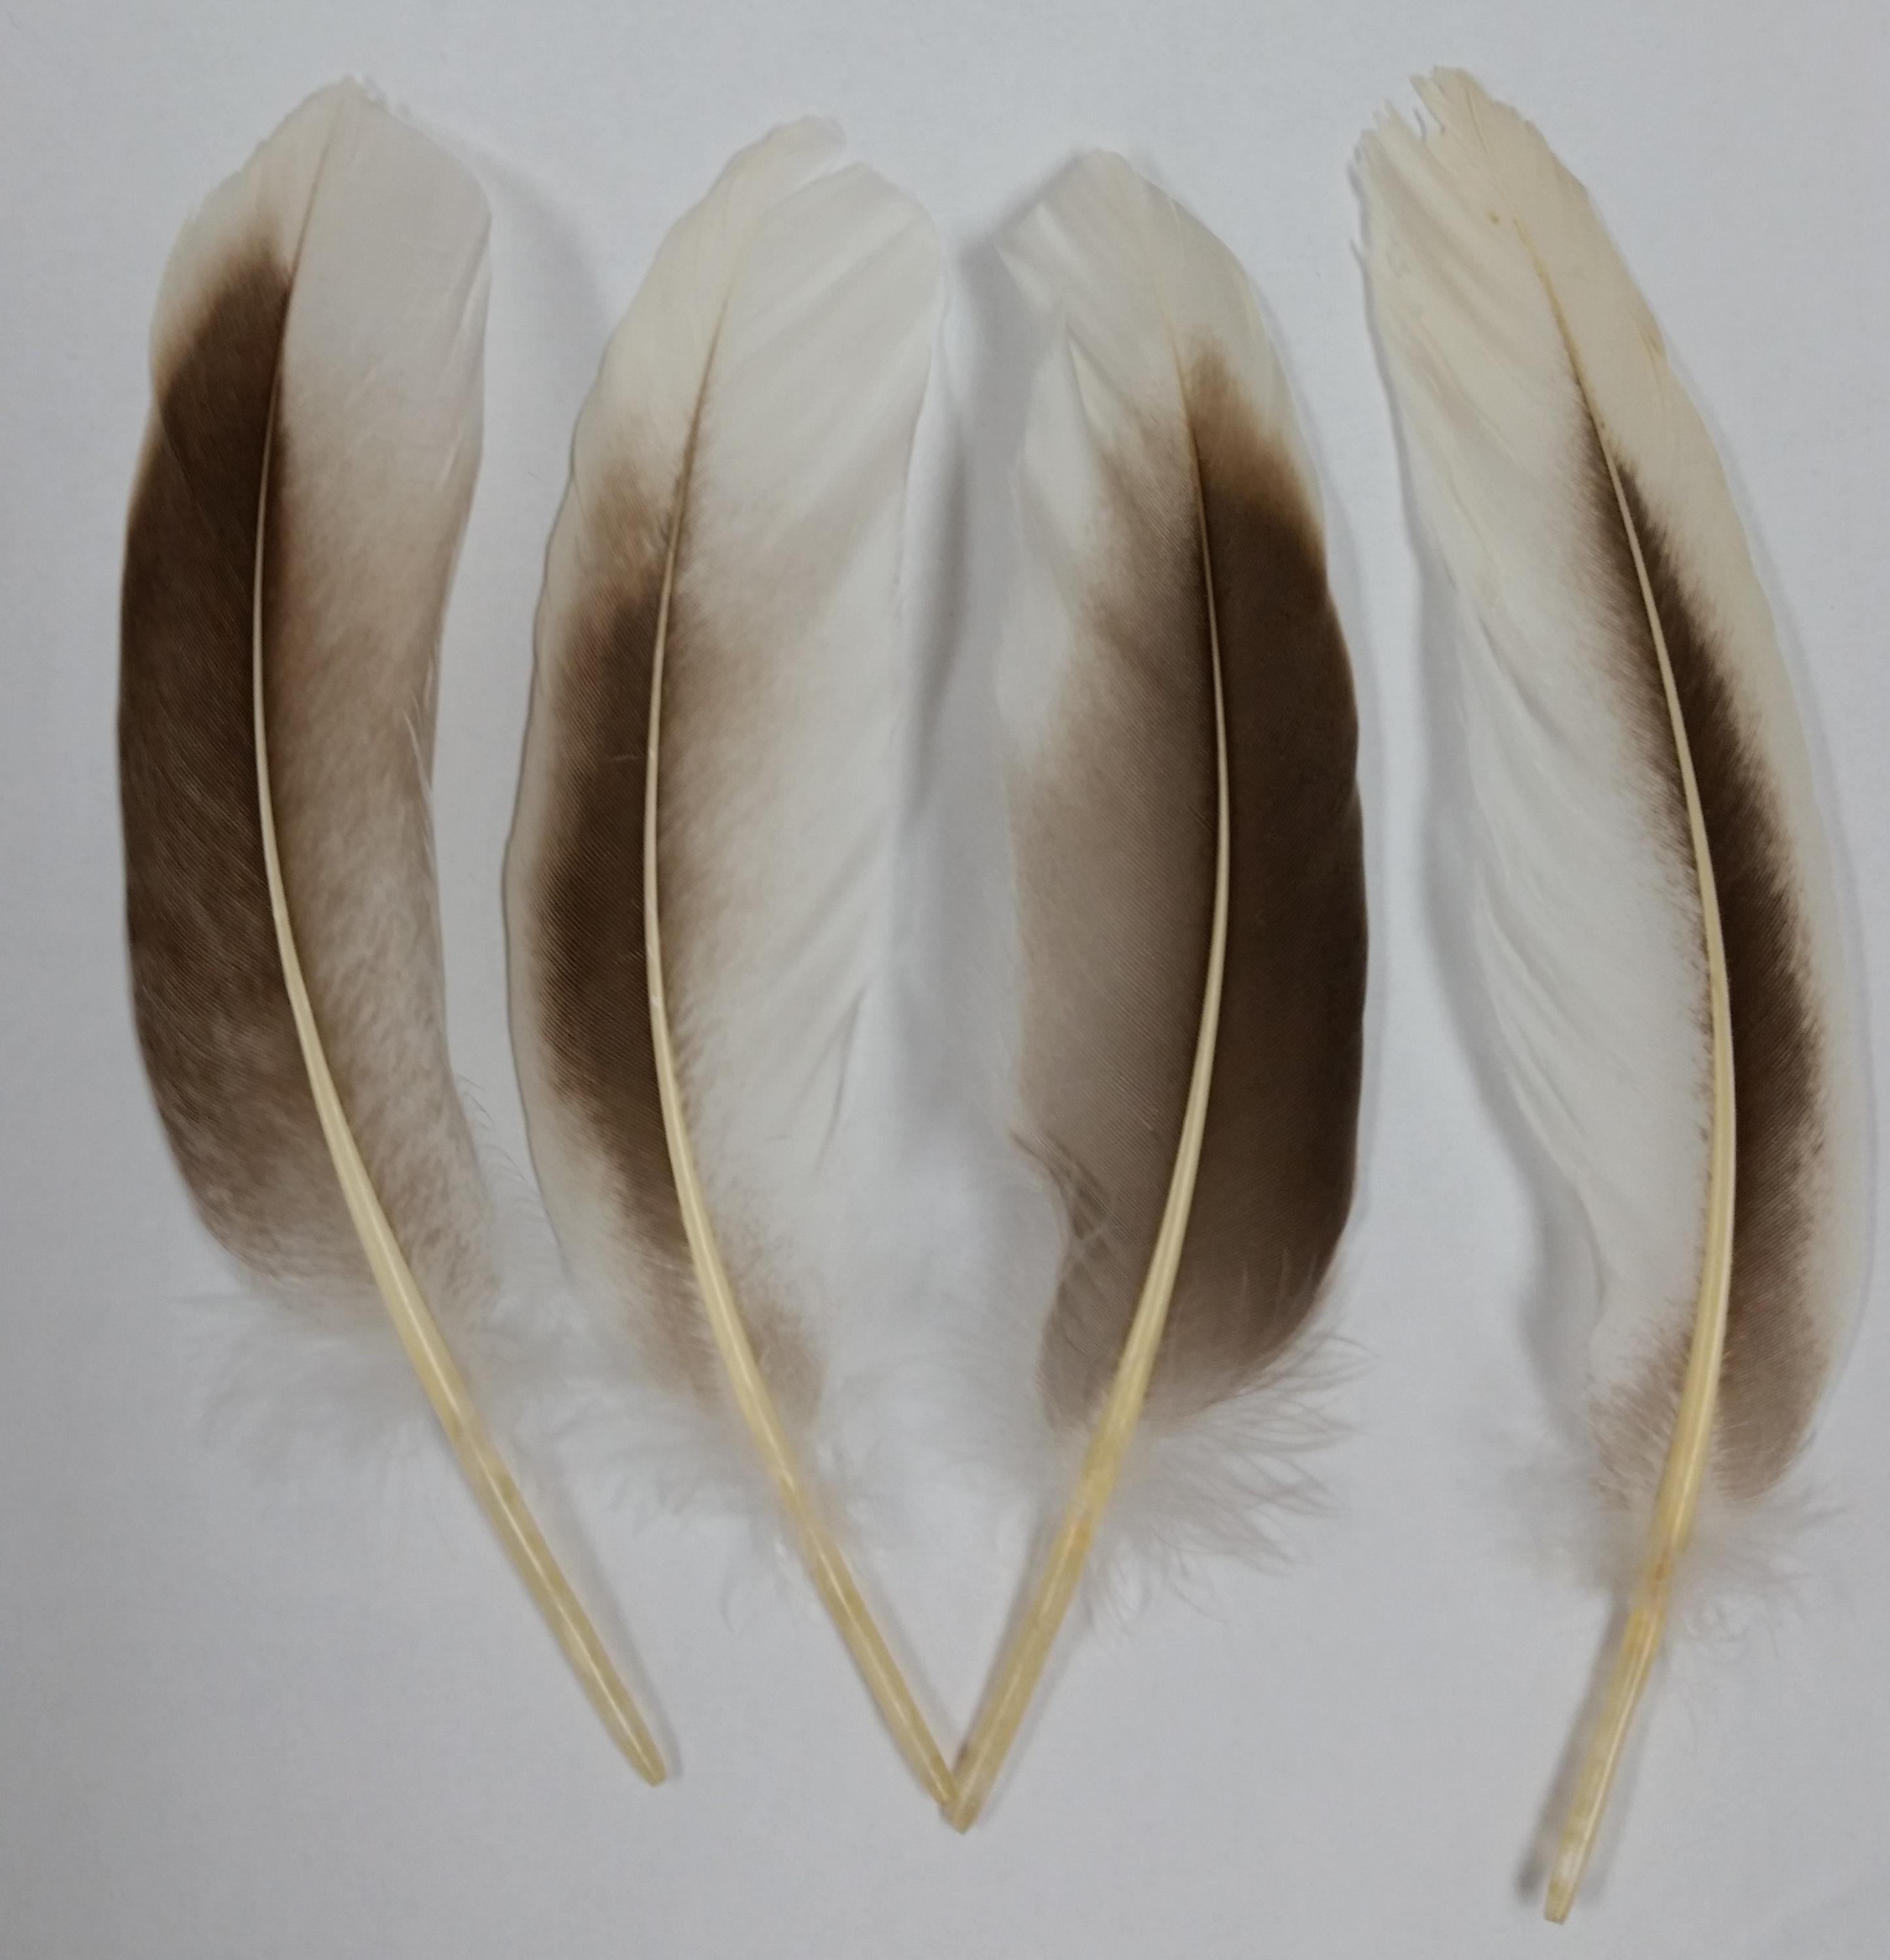 White & brown goose feathers